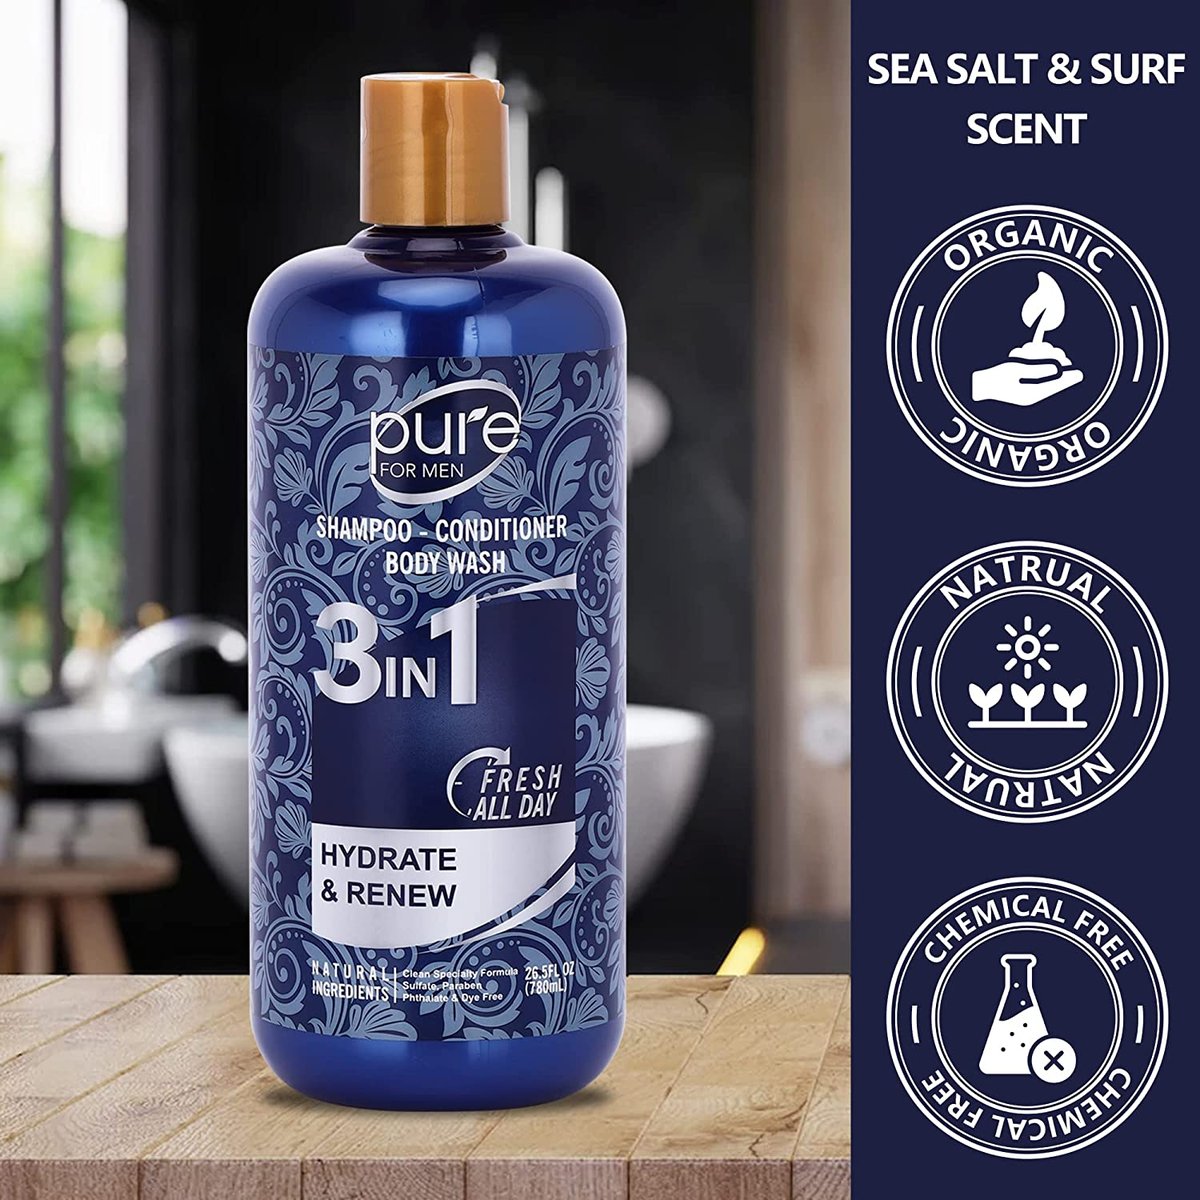 https://images.verishop.com/purelis-mens-body-wash-shampoo-conditioner-combo-best-3-in-1-shower-wash-for-men-body-hair-face-wash-all-in-1-mens-shower-gel-1-bottle-265-oz/M05065006184852-2112326157?auto=format&cs=strip&fit=max&w=1200